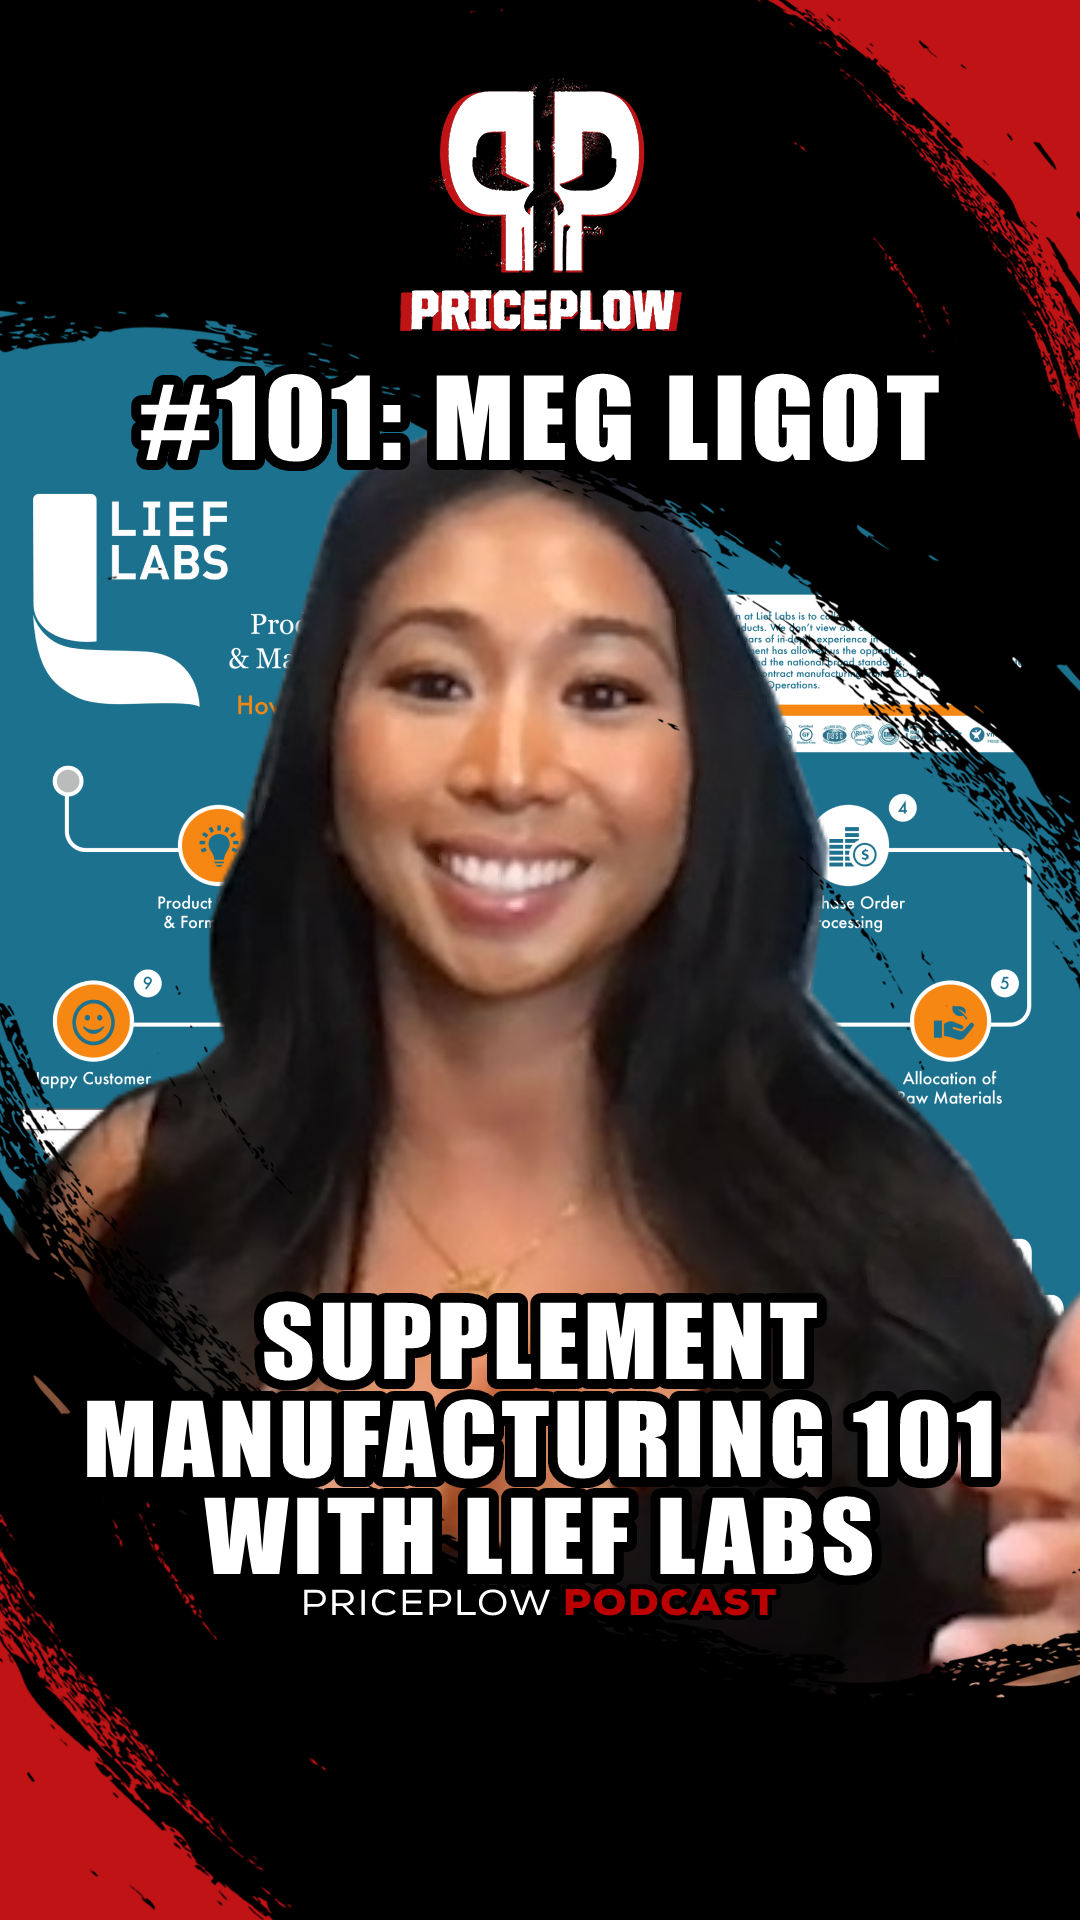 Supplement Manufacturing 101 with Lief Labs: PricePlow Podcast Episode #101 with Meg Ligot